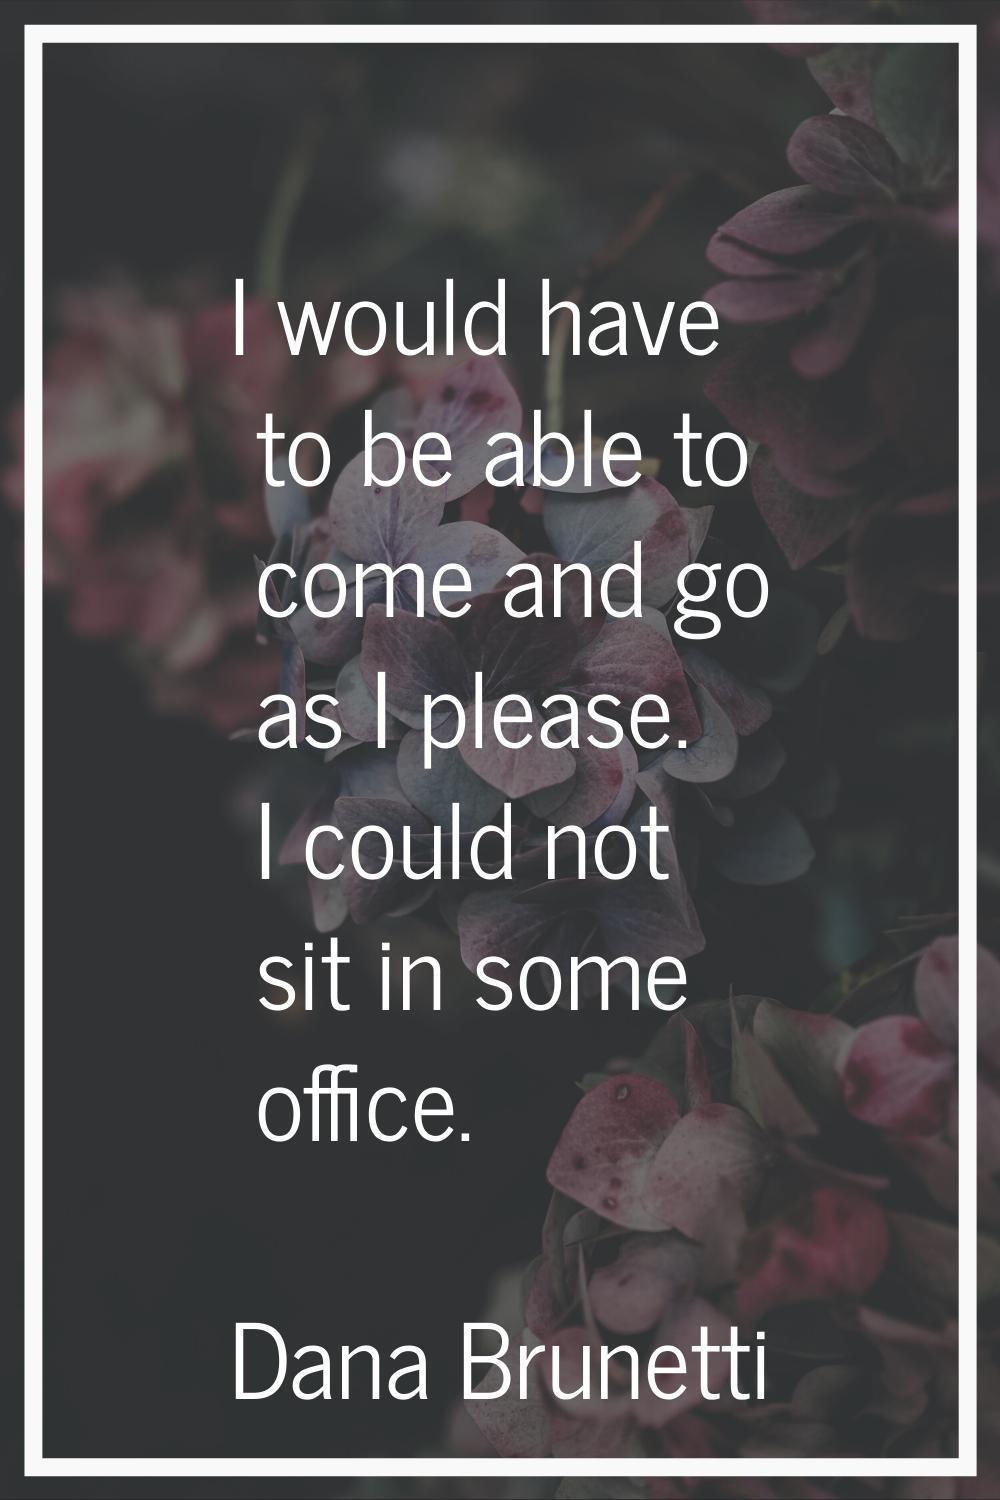 I would have to be able to come and go as I please. I could not sit in some office.